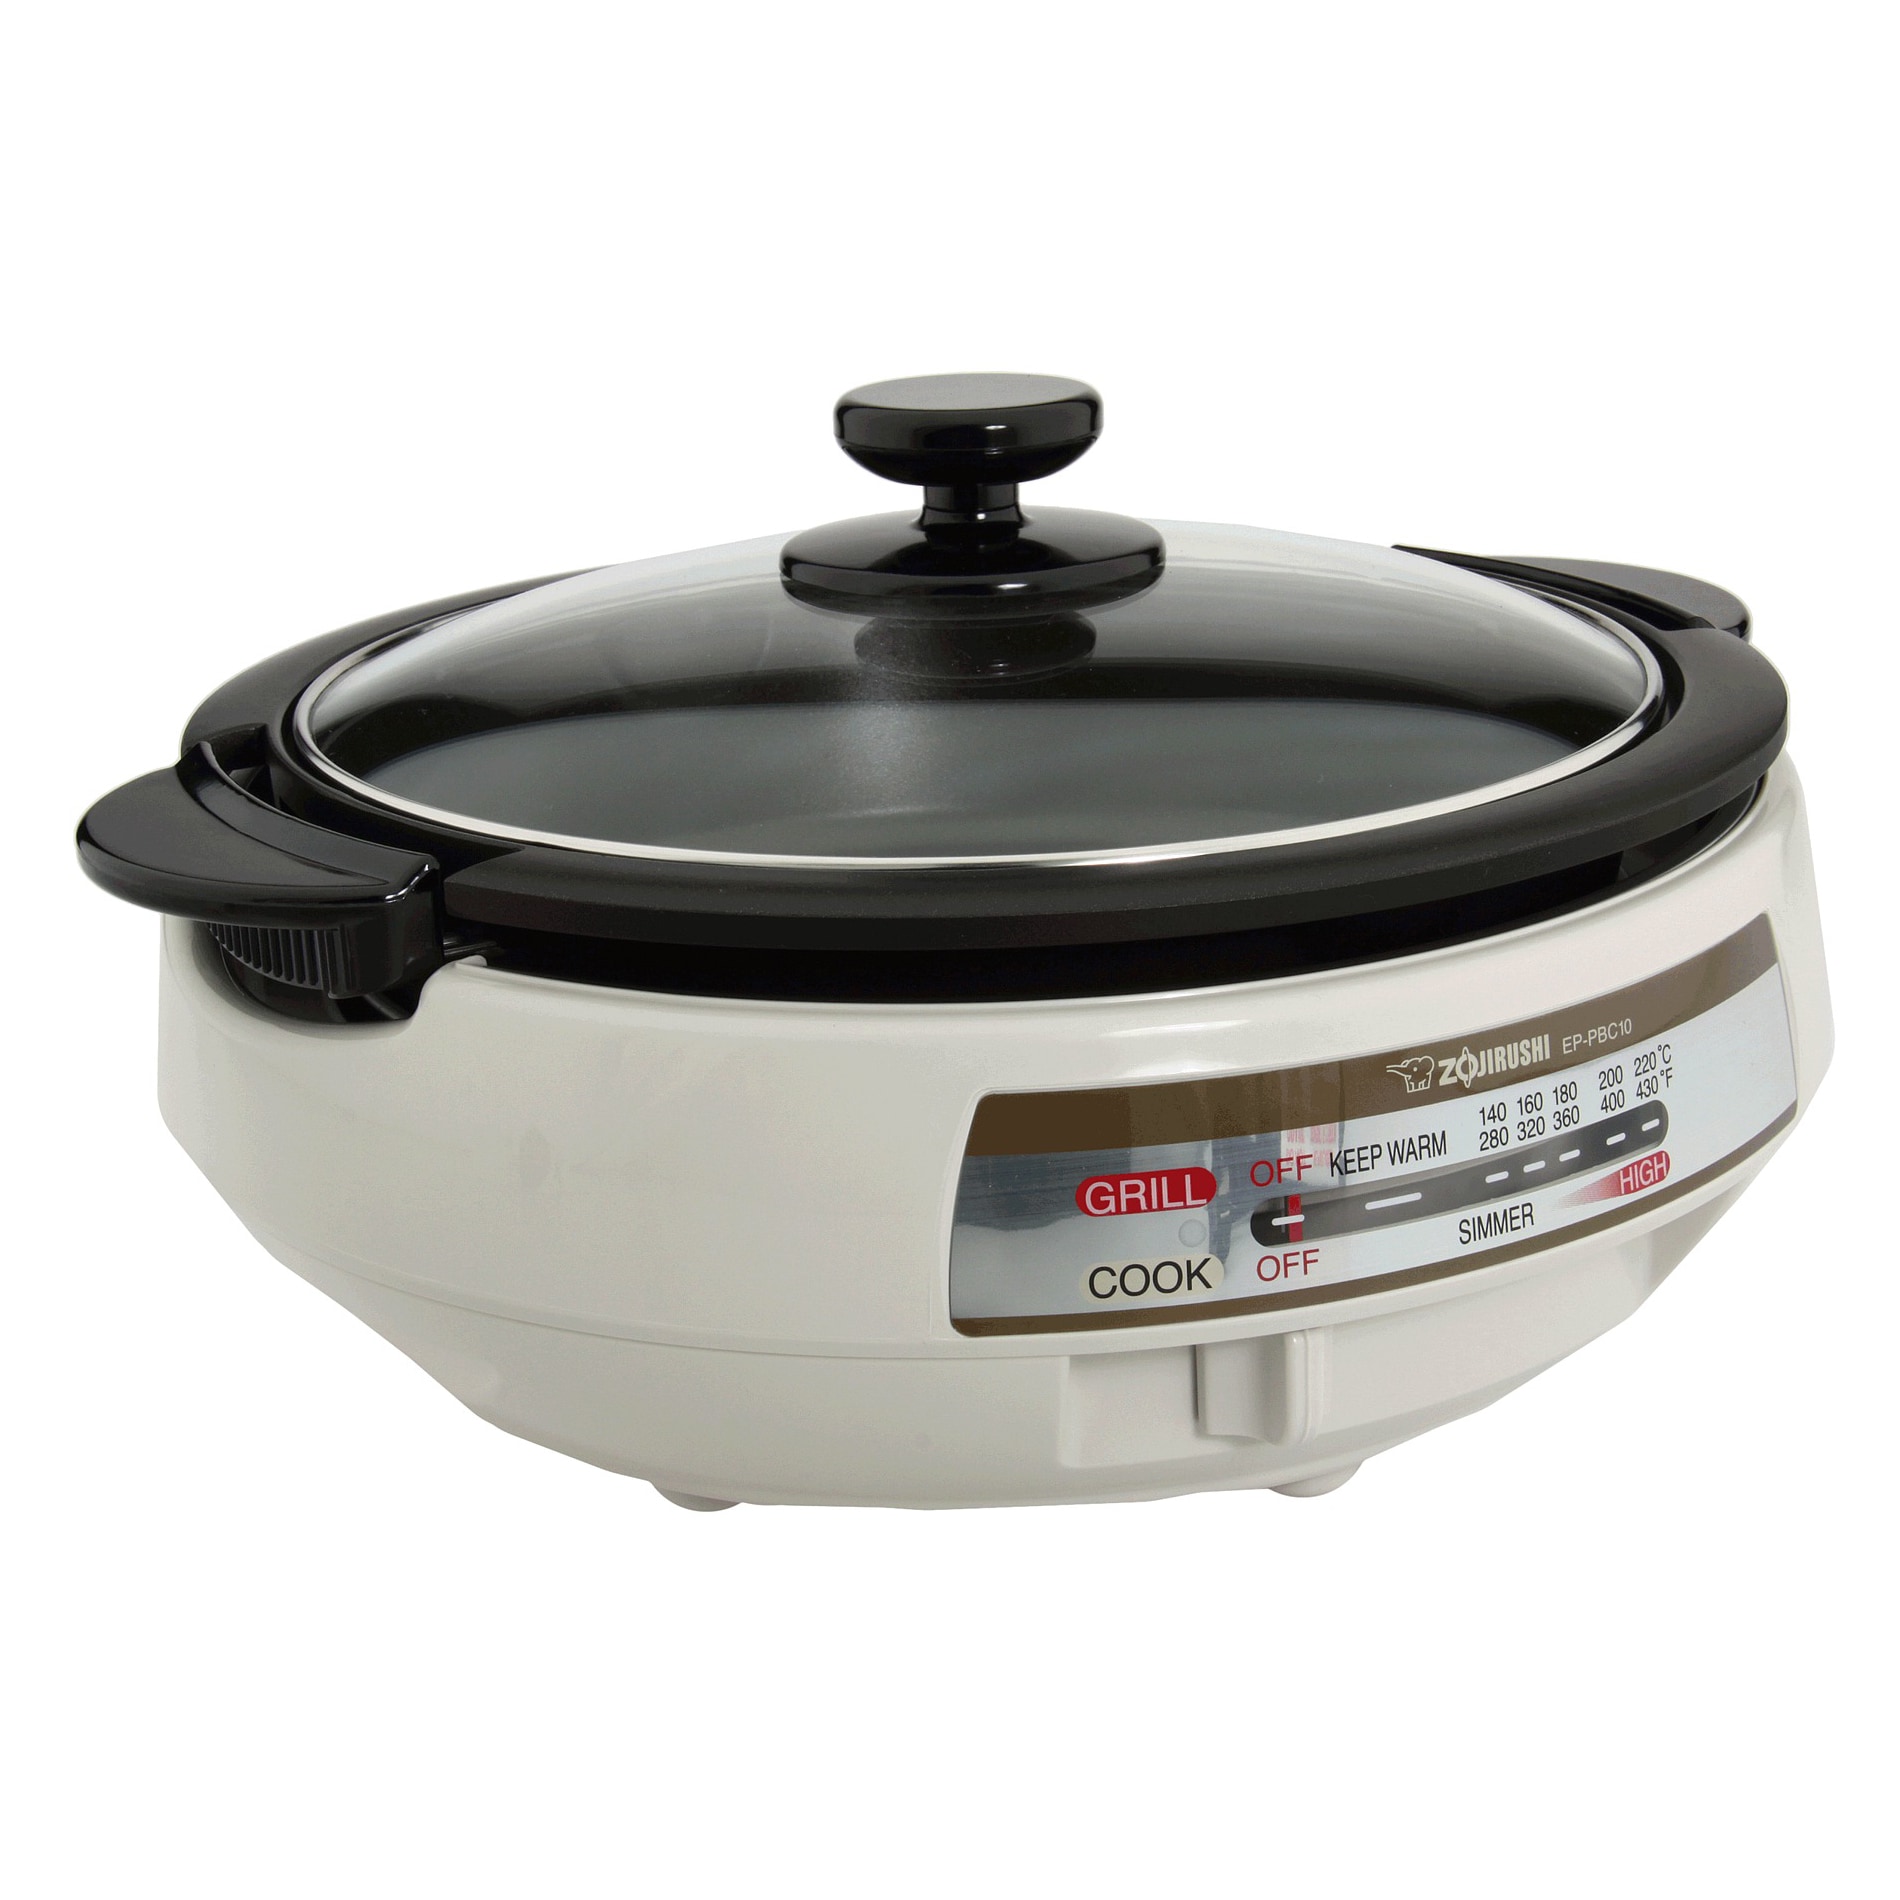 Della 10-in-1 Multi-Function Electric Pressure Cooker Stainless Steel,  Programmable 10-QT - Bed Bath & Beyond - 15874228